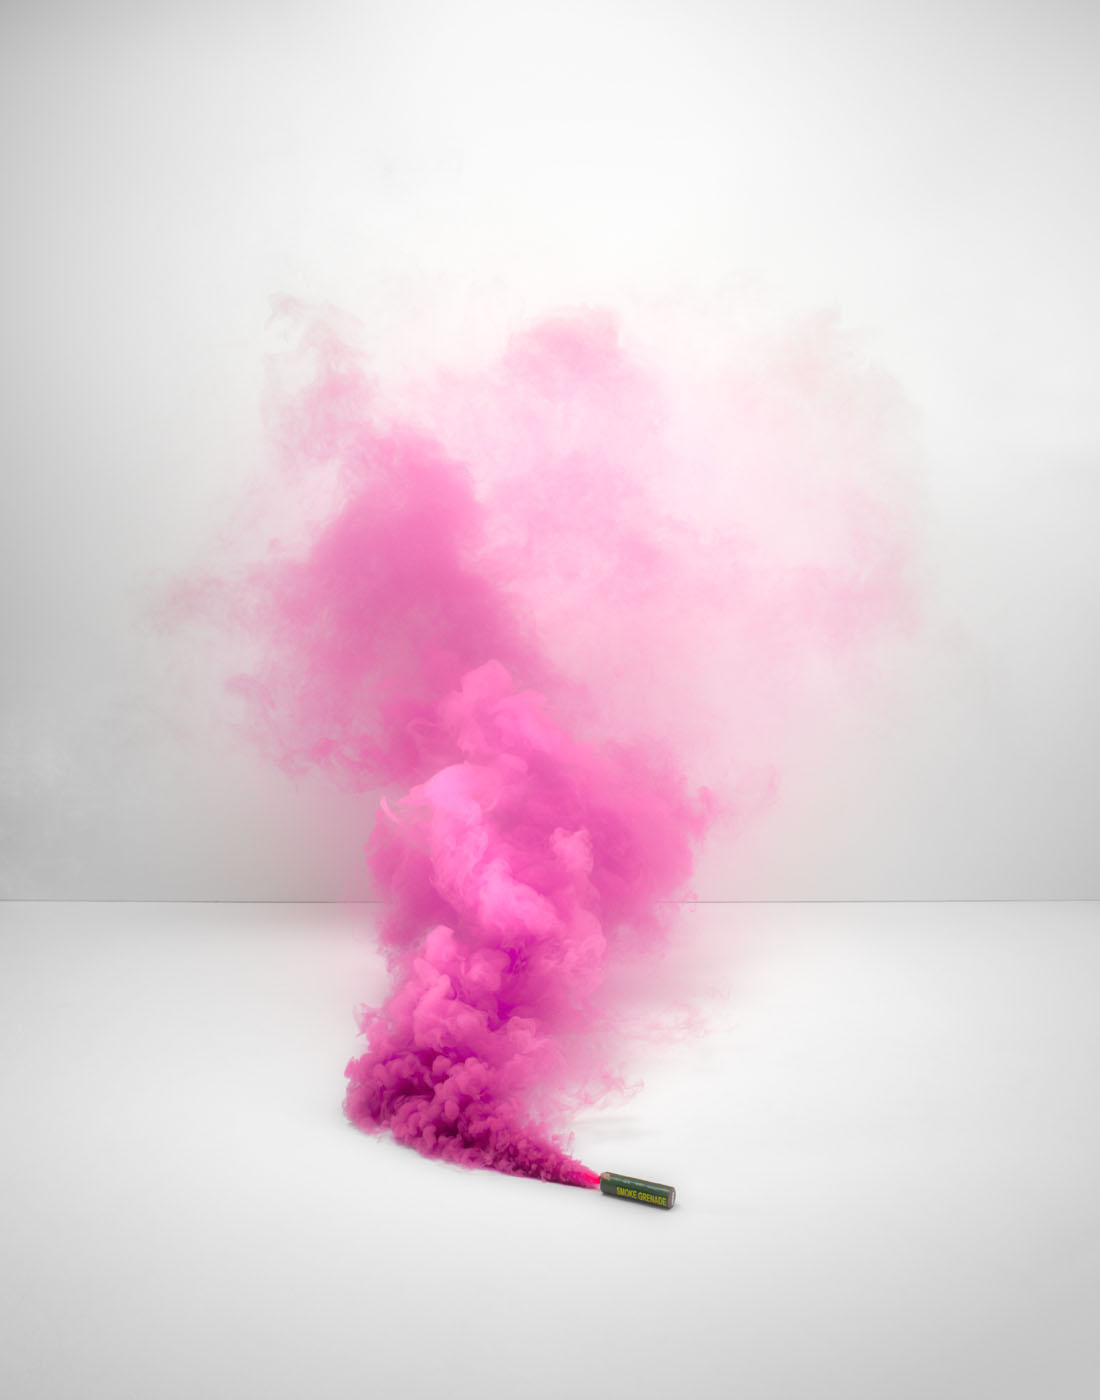 Pink smoke explosion by Alexander Kent London based still life and product photographer.